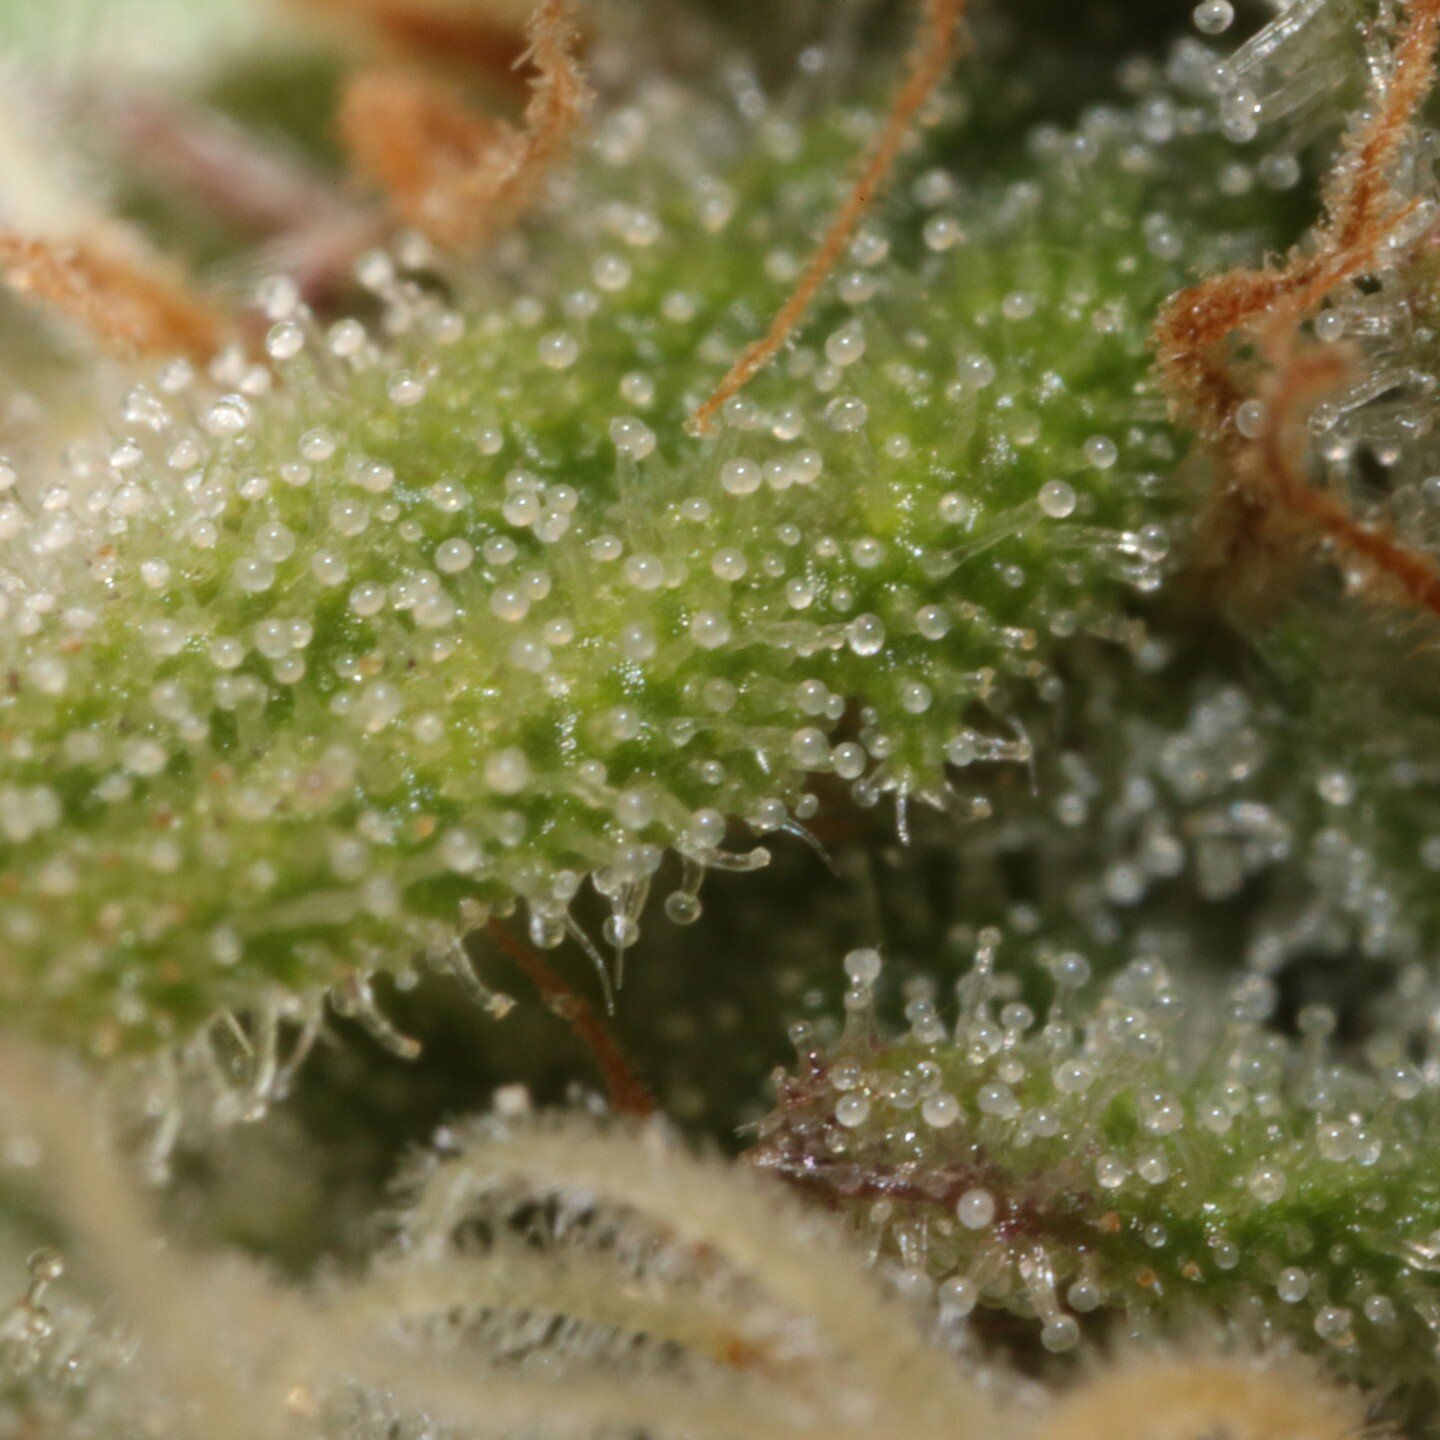 Unedited close-up of those sweet cannabis trichomes.